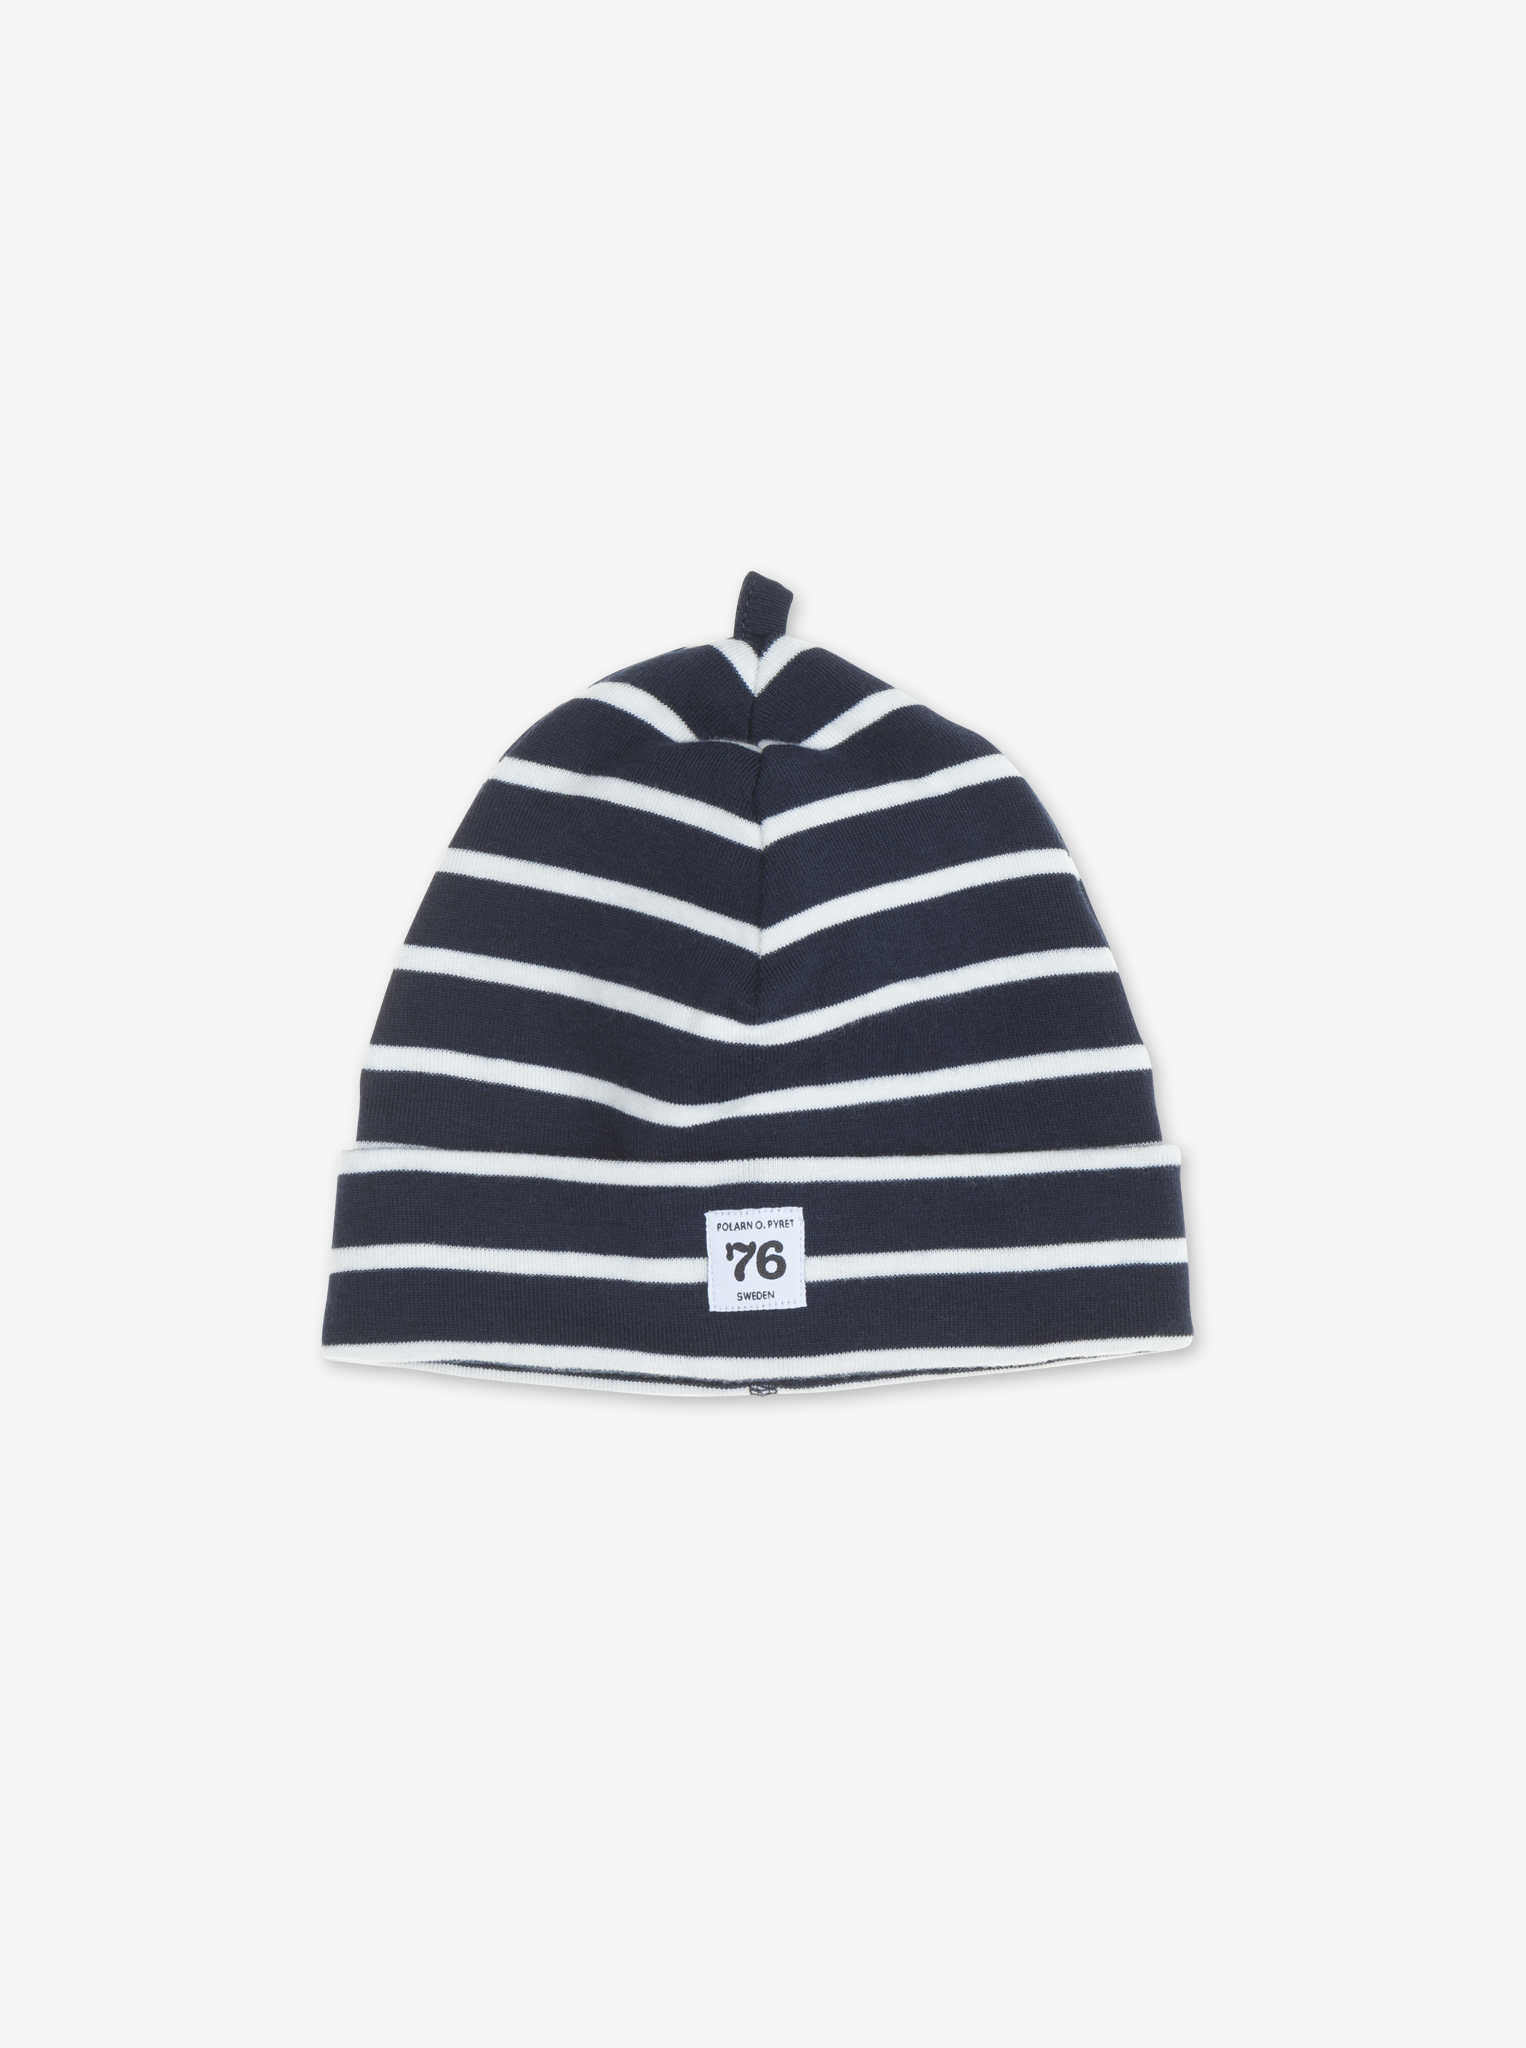 kids navy and white stripes organic cotton hat, high quality comfortable polarn o. pyret childrens